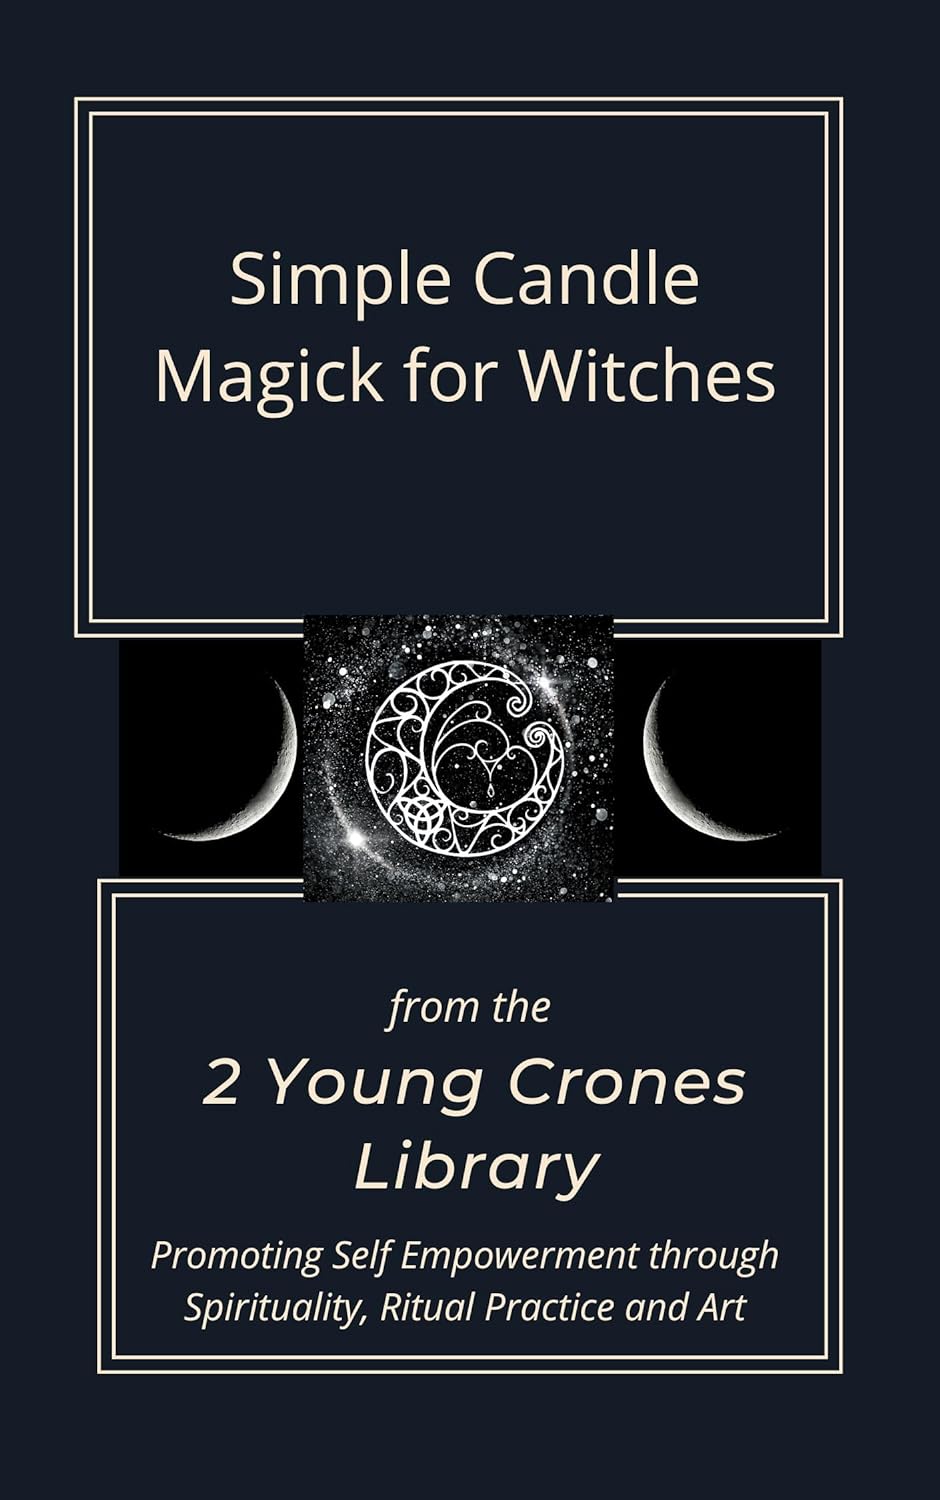 Simple Candle Magick for Witches